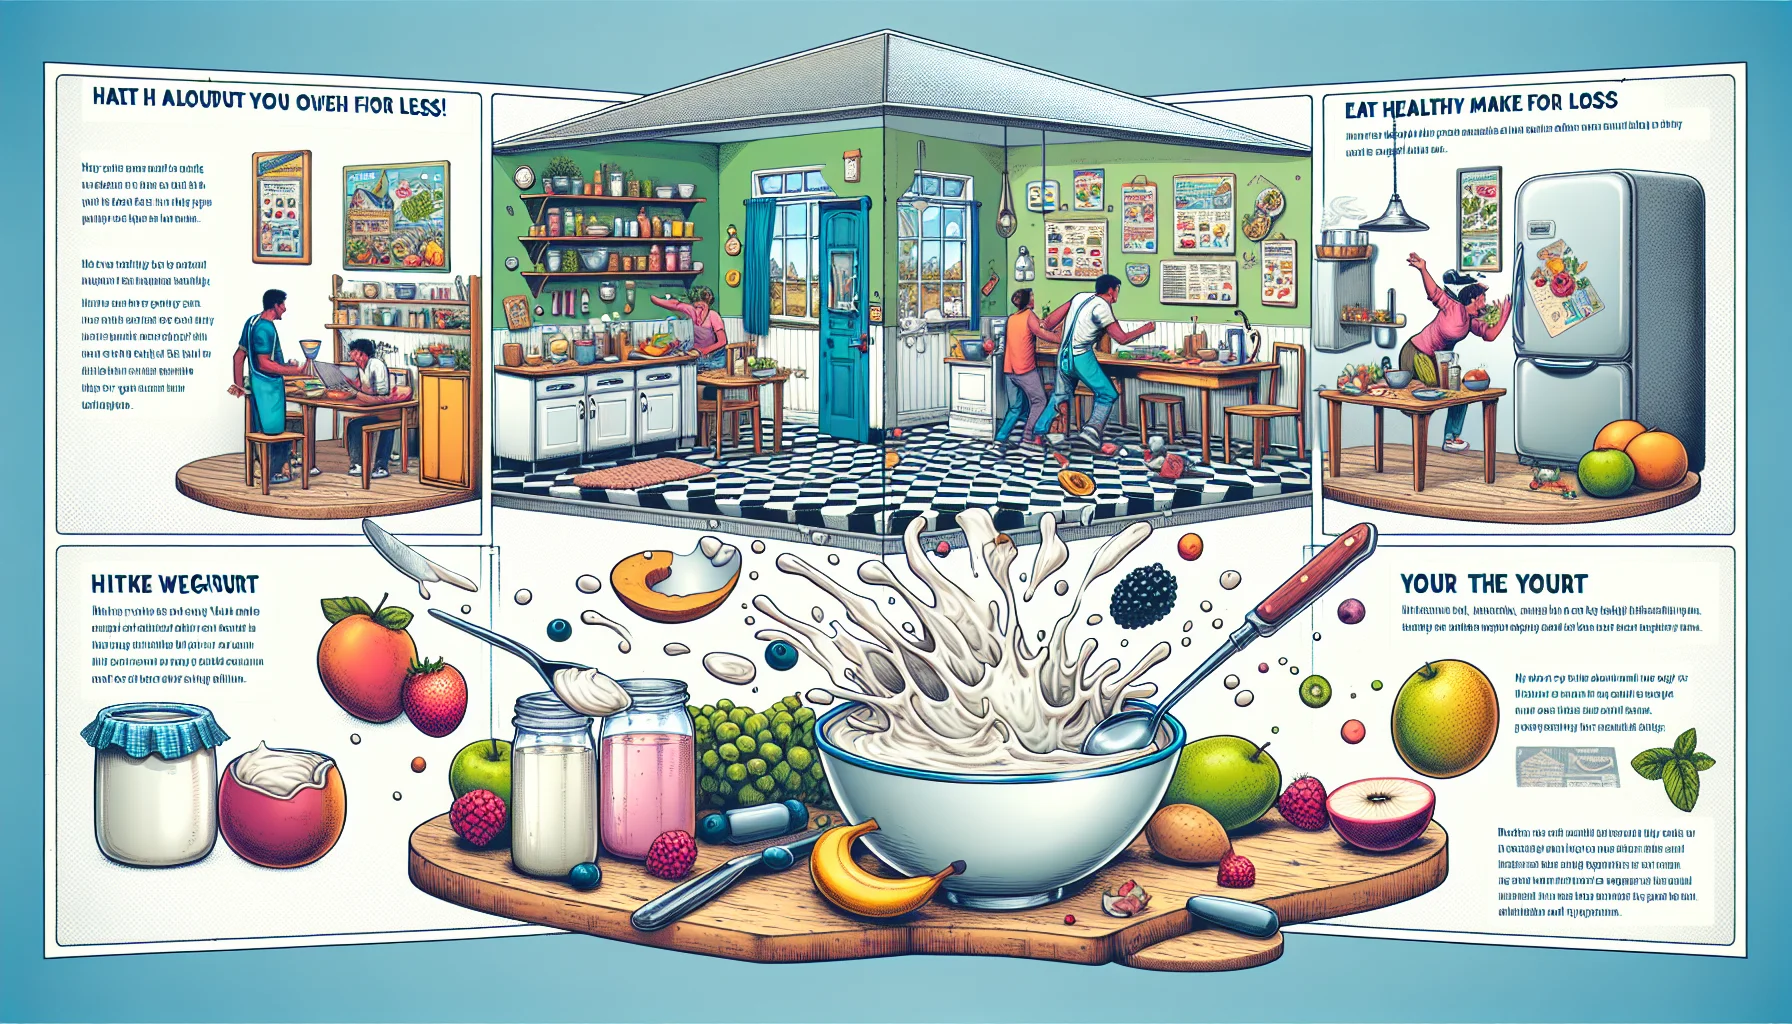 A detailed image illustrating a humorous take on the process of making yogurt at home as a cost-effective and healthy option. The scenario features people experiencing hilarity in their kitchen; maybe they've spilled some ingredients in a slapstick manner or the yogurt appears to be animated and jumping into the bowl itself. Show a rainbow of fruits and yogurt flavors representing the variety of healthy choices that can be made. The room's appearance should suggest simplicity and accessibility, relatable to everyone. Include a banner in the image stating 'Eat Healthy for Less!' to convey the message directly.